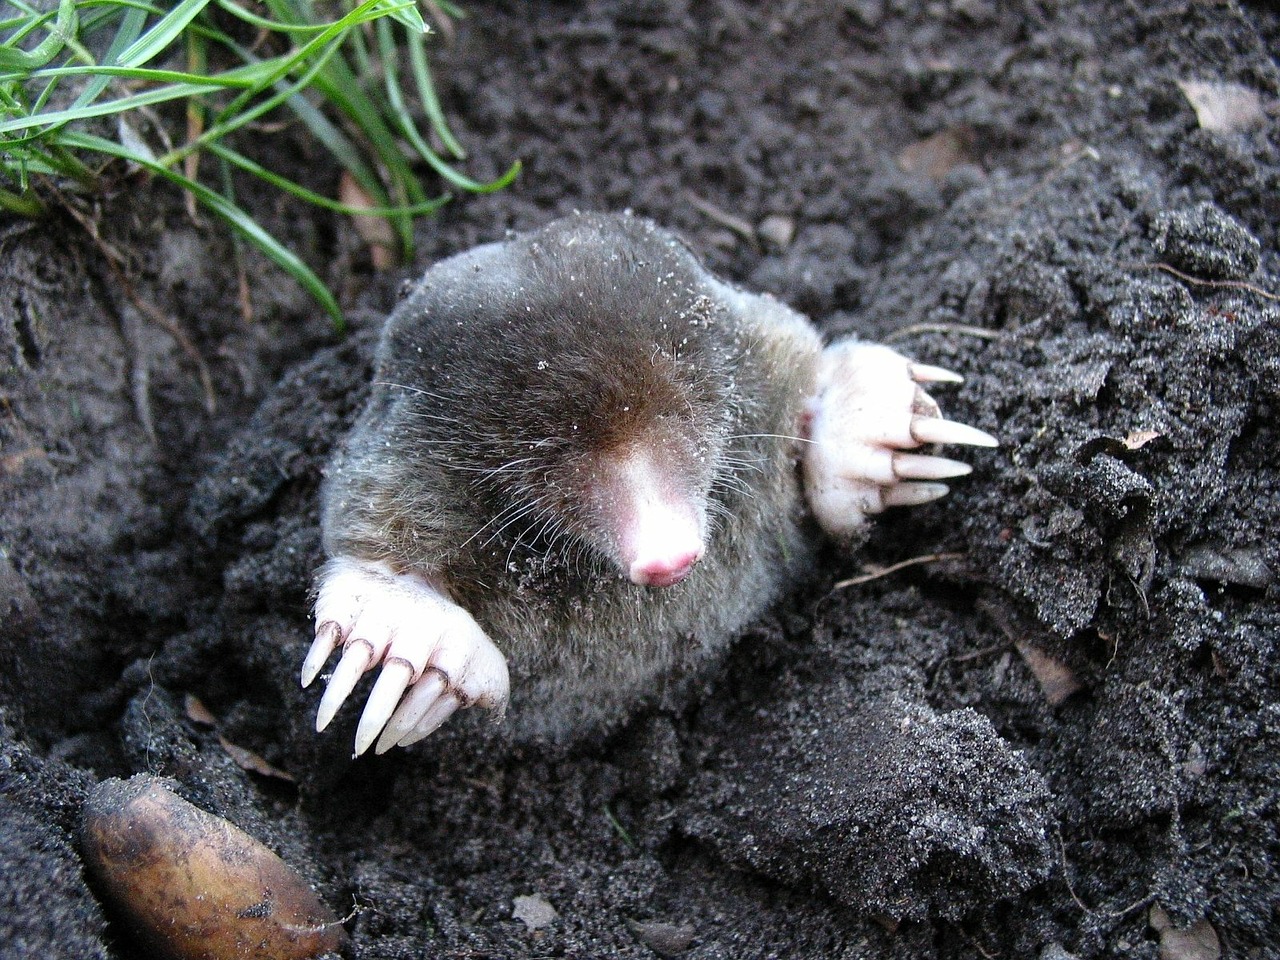 Moles burring up from the ground